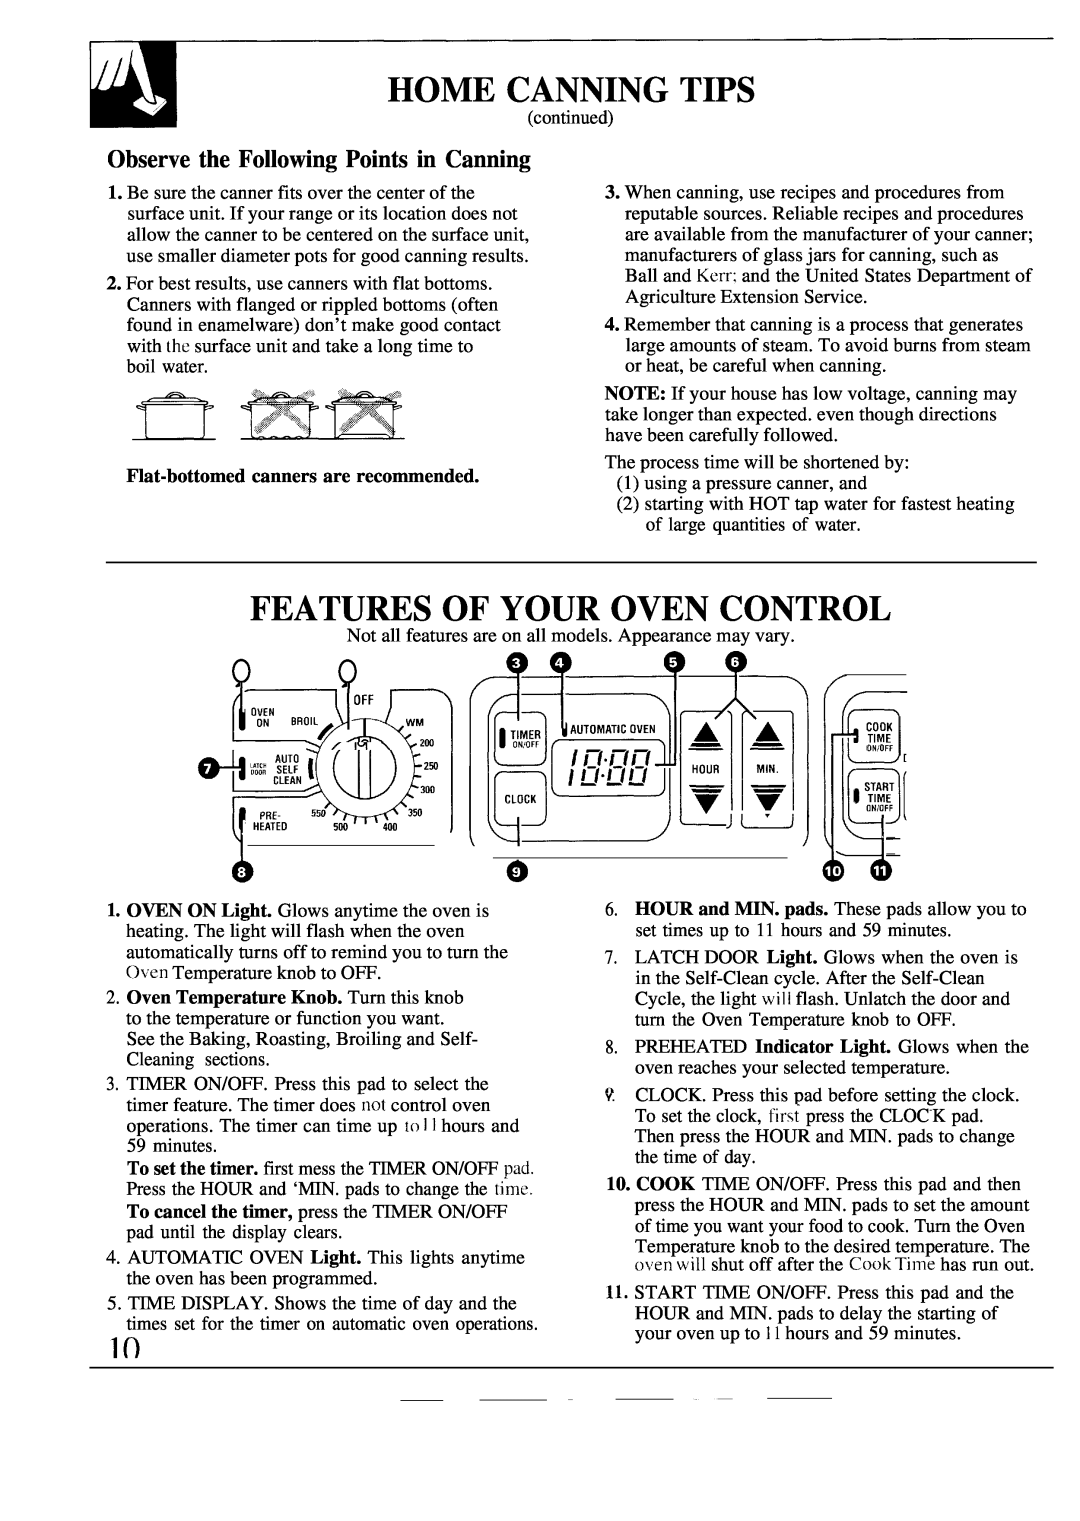 GE JBP20, JBP19, JBPA48 Features Of Your Oven Control, pmqJ,TT, Observe the Following Points in Canning, Home Canning Tips 